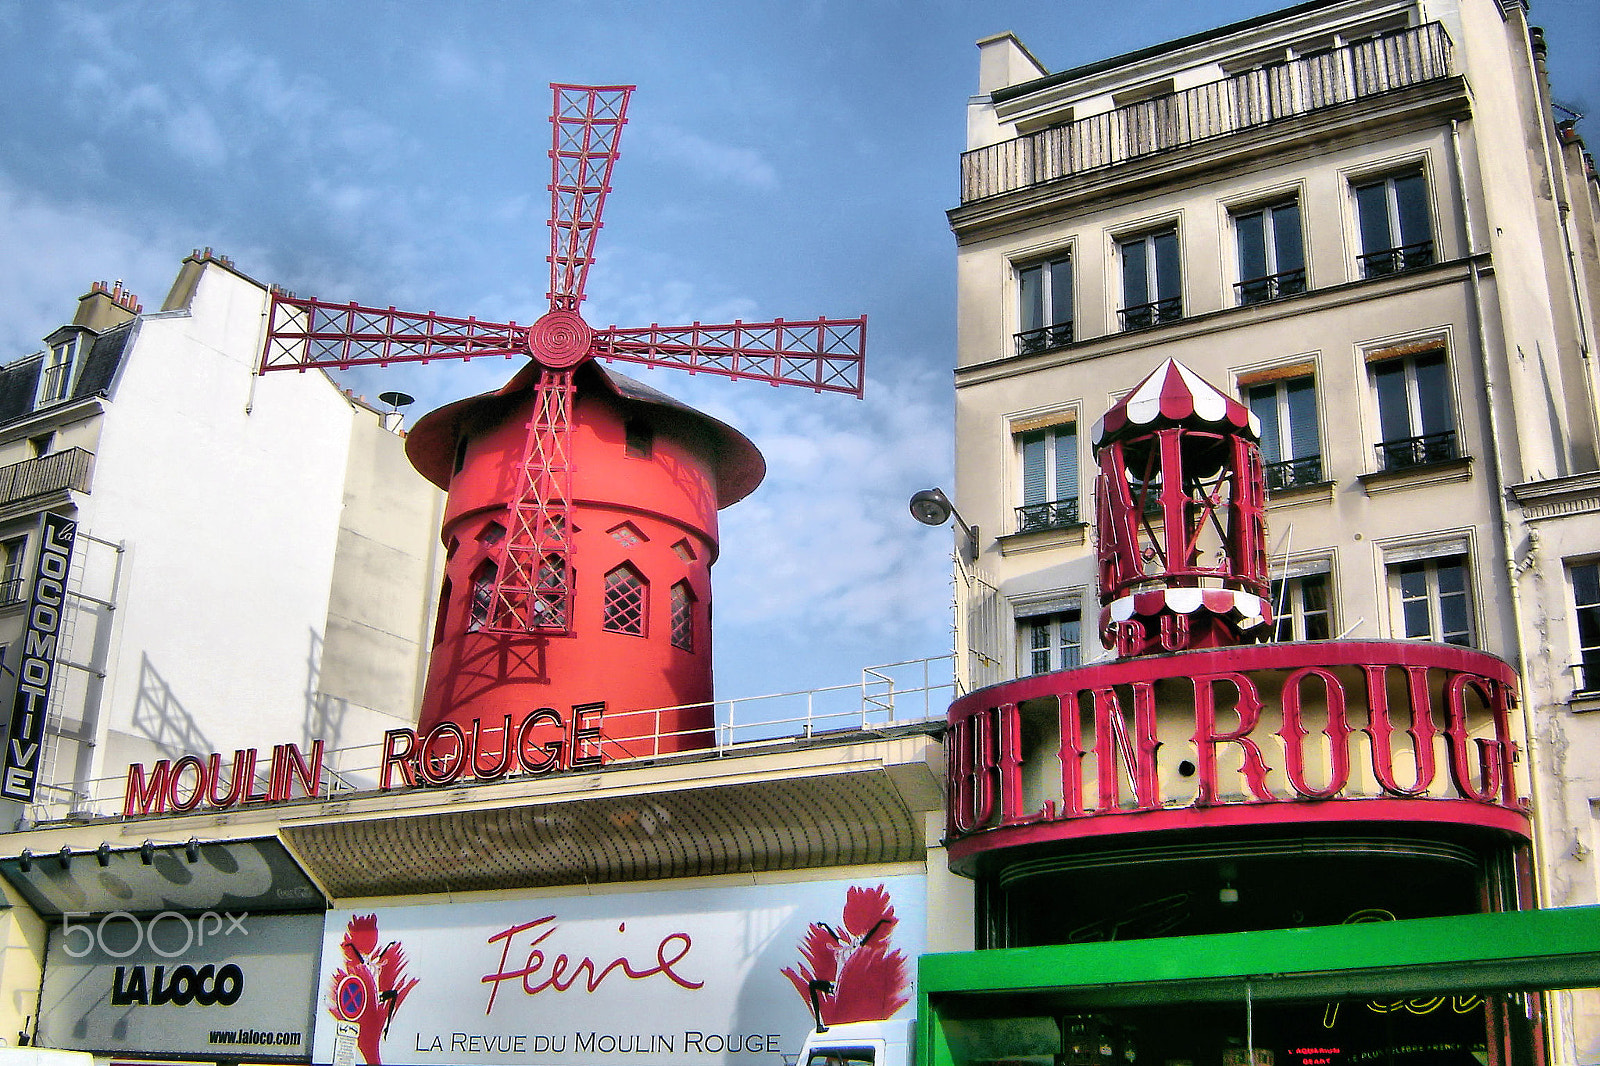 Sony DSC-P73 sample photo. Moulin rouge is a cabaret in paris, france. photography